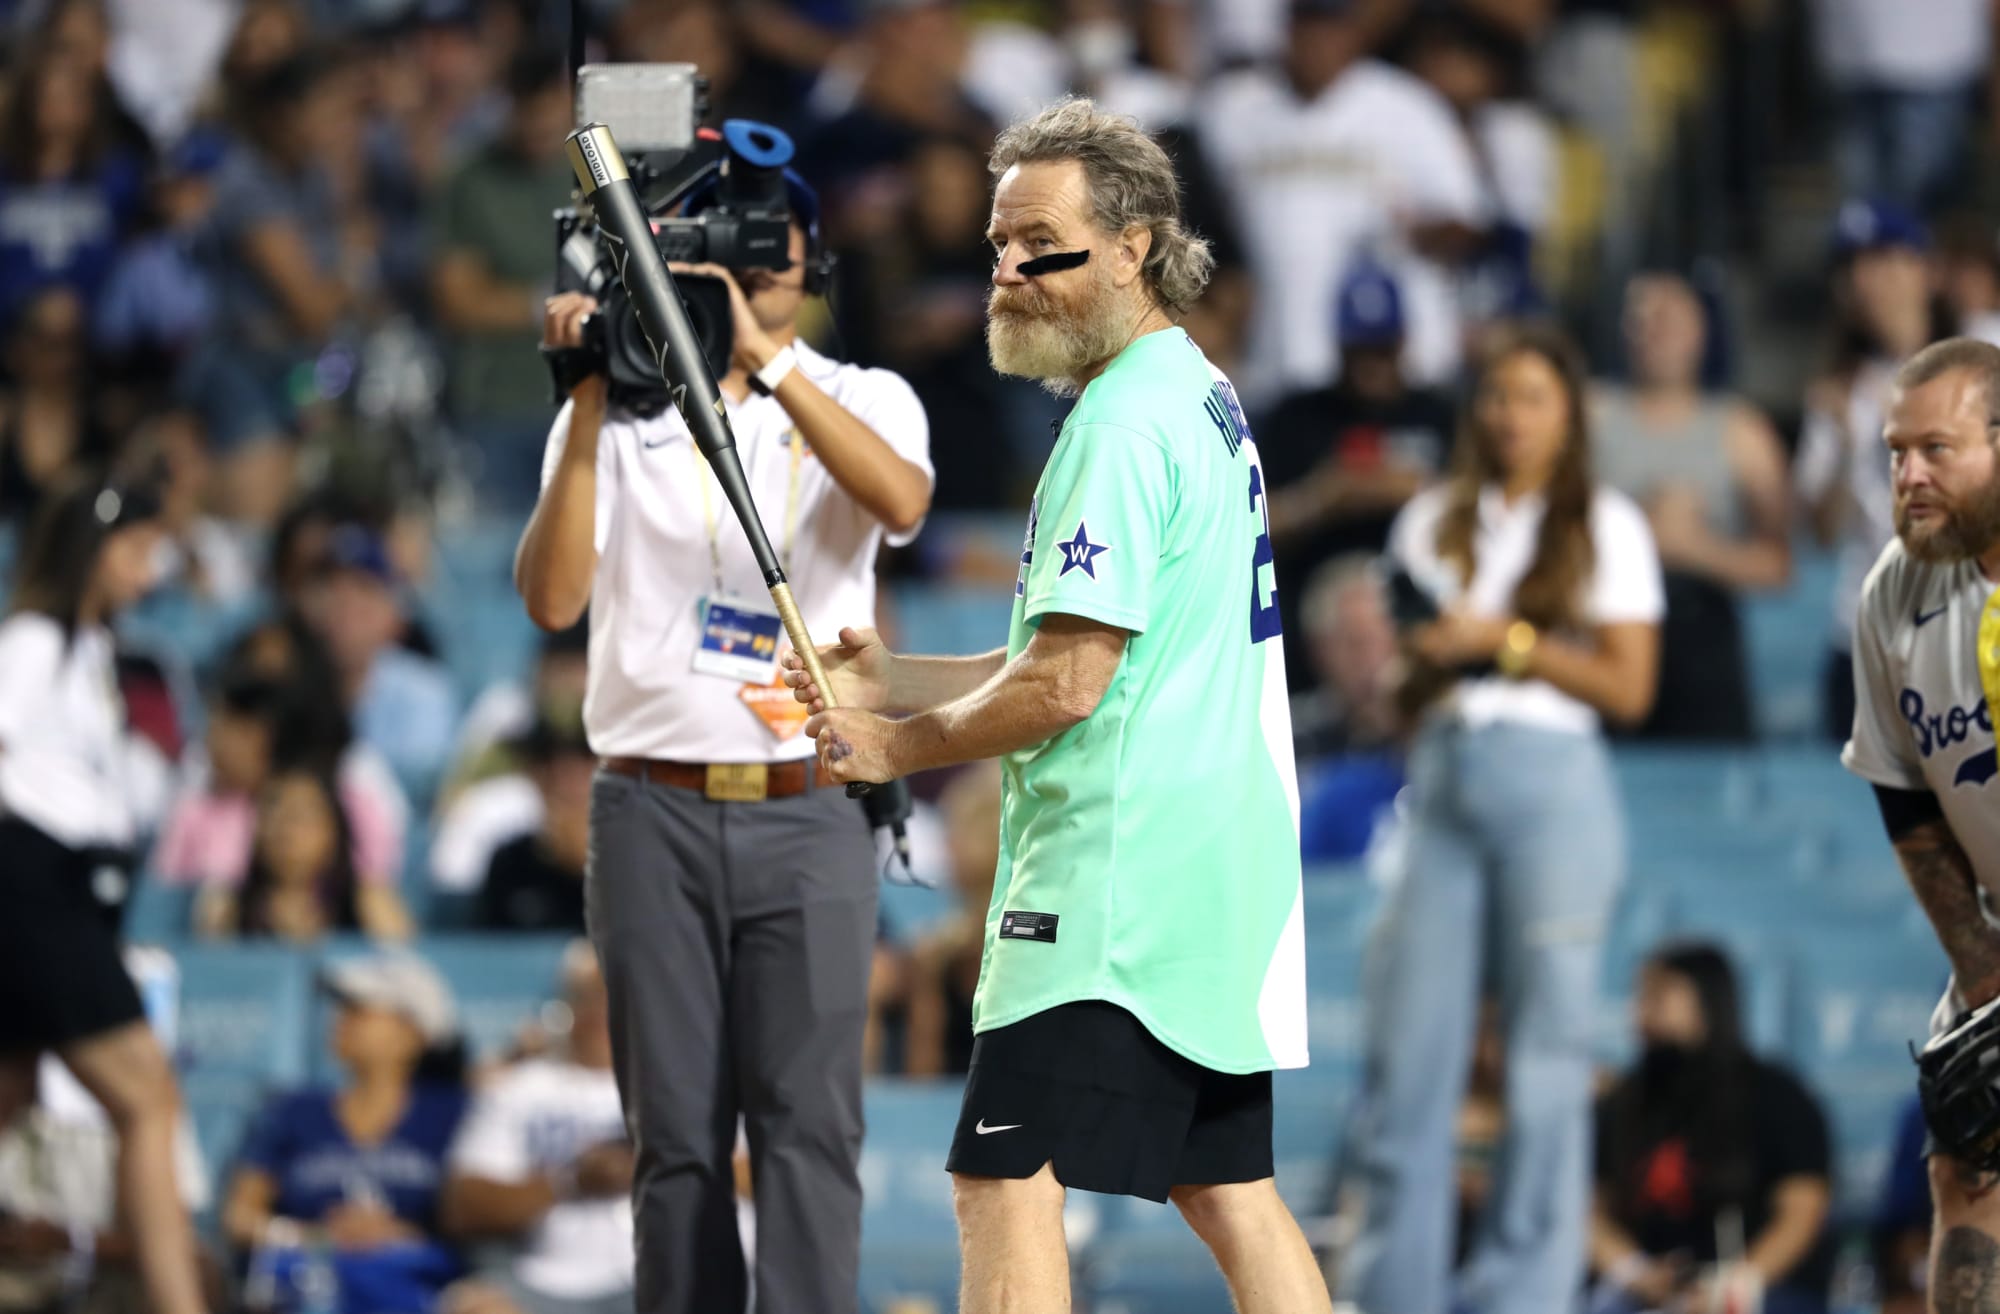 Bryan Cranston breaks bad, argues with ump in MLB All-Star Celebrity game (Video)